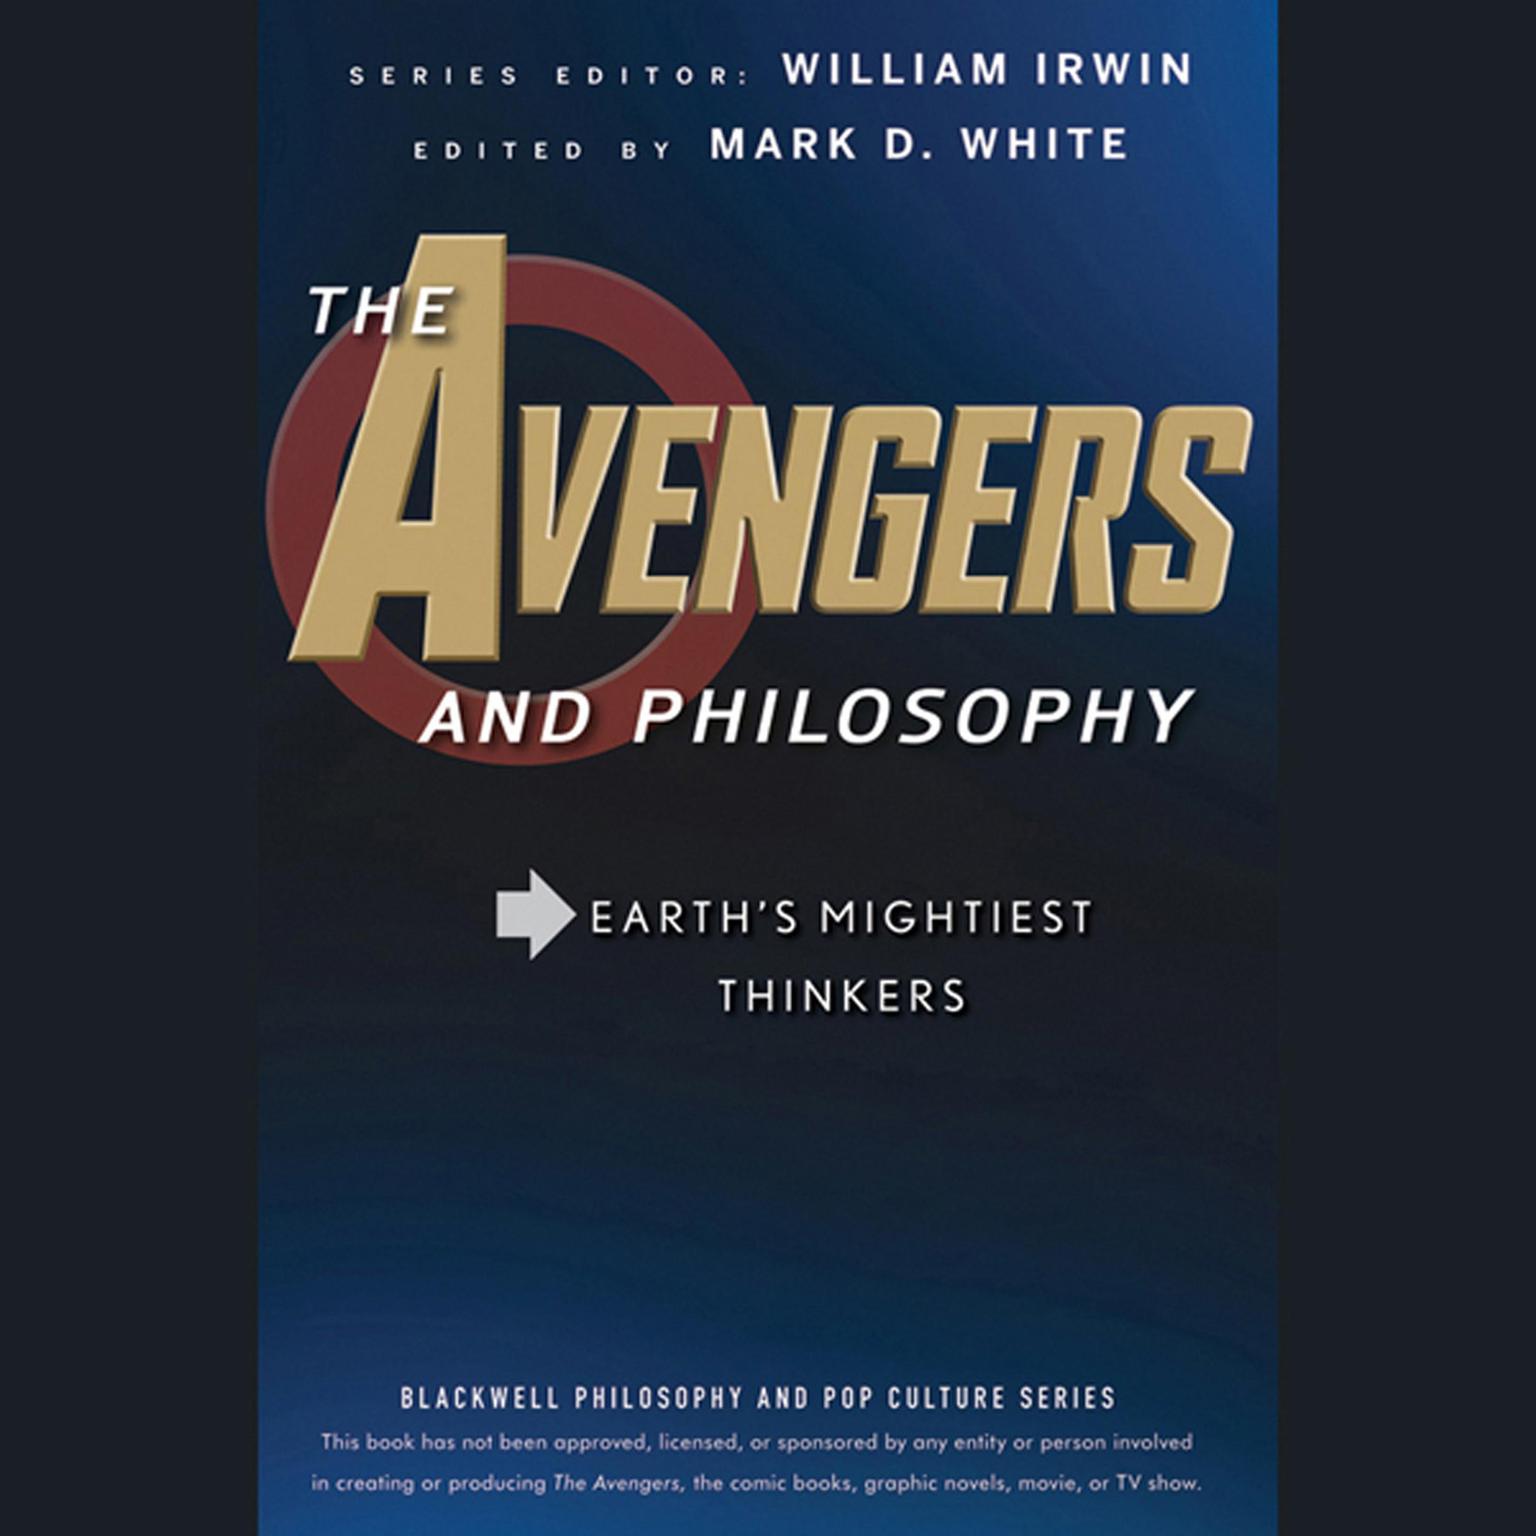 The Avengers and Philosophy: Earths Mightiest Thinkers Audiobook, by William Irwin